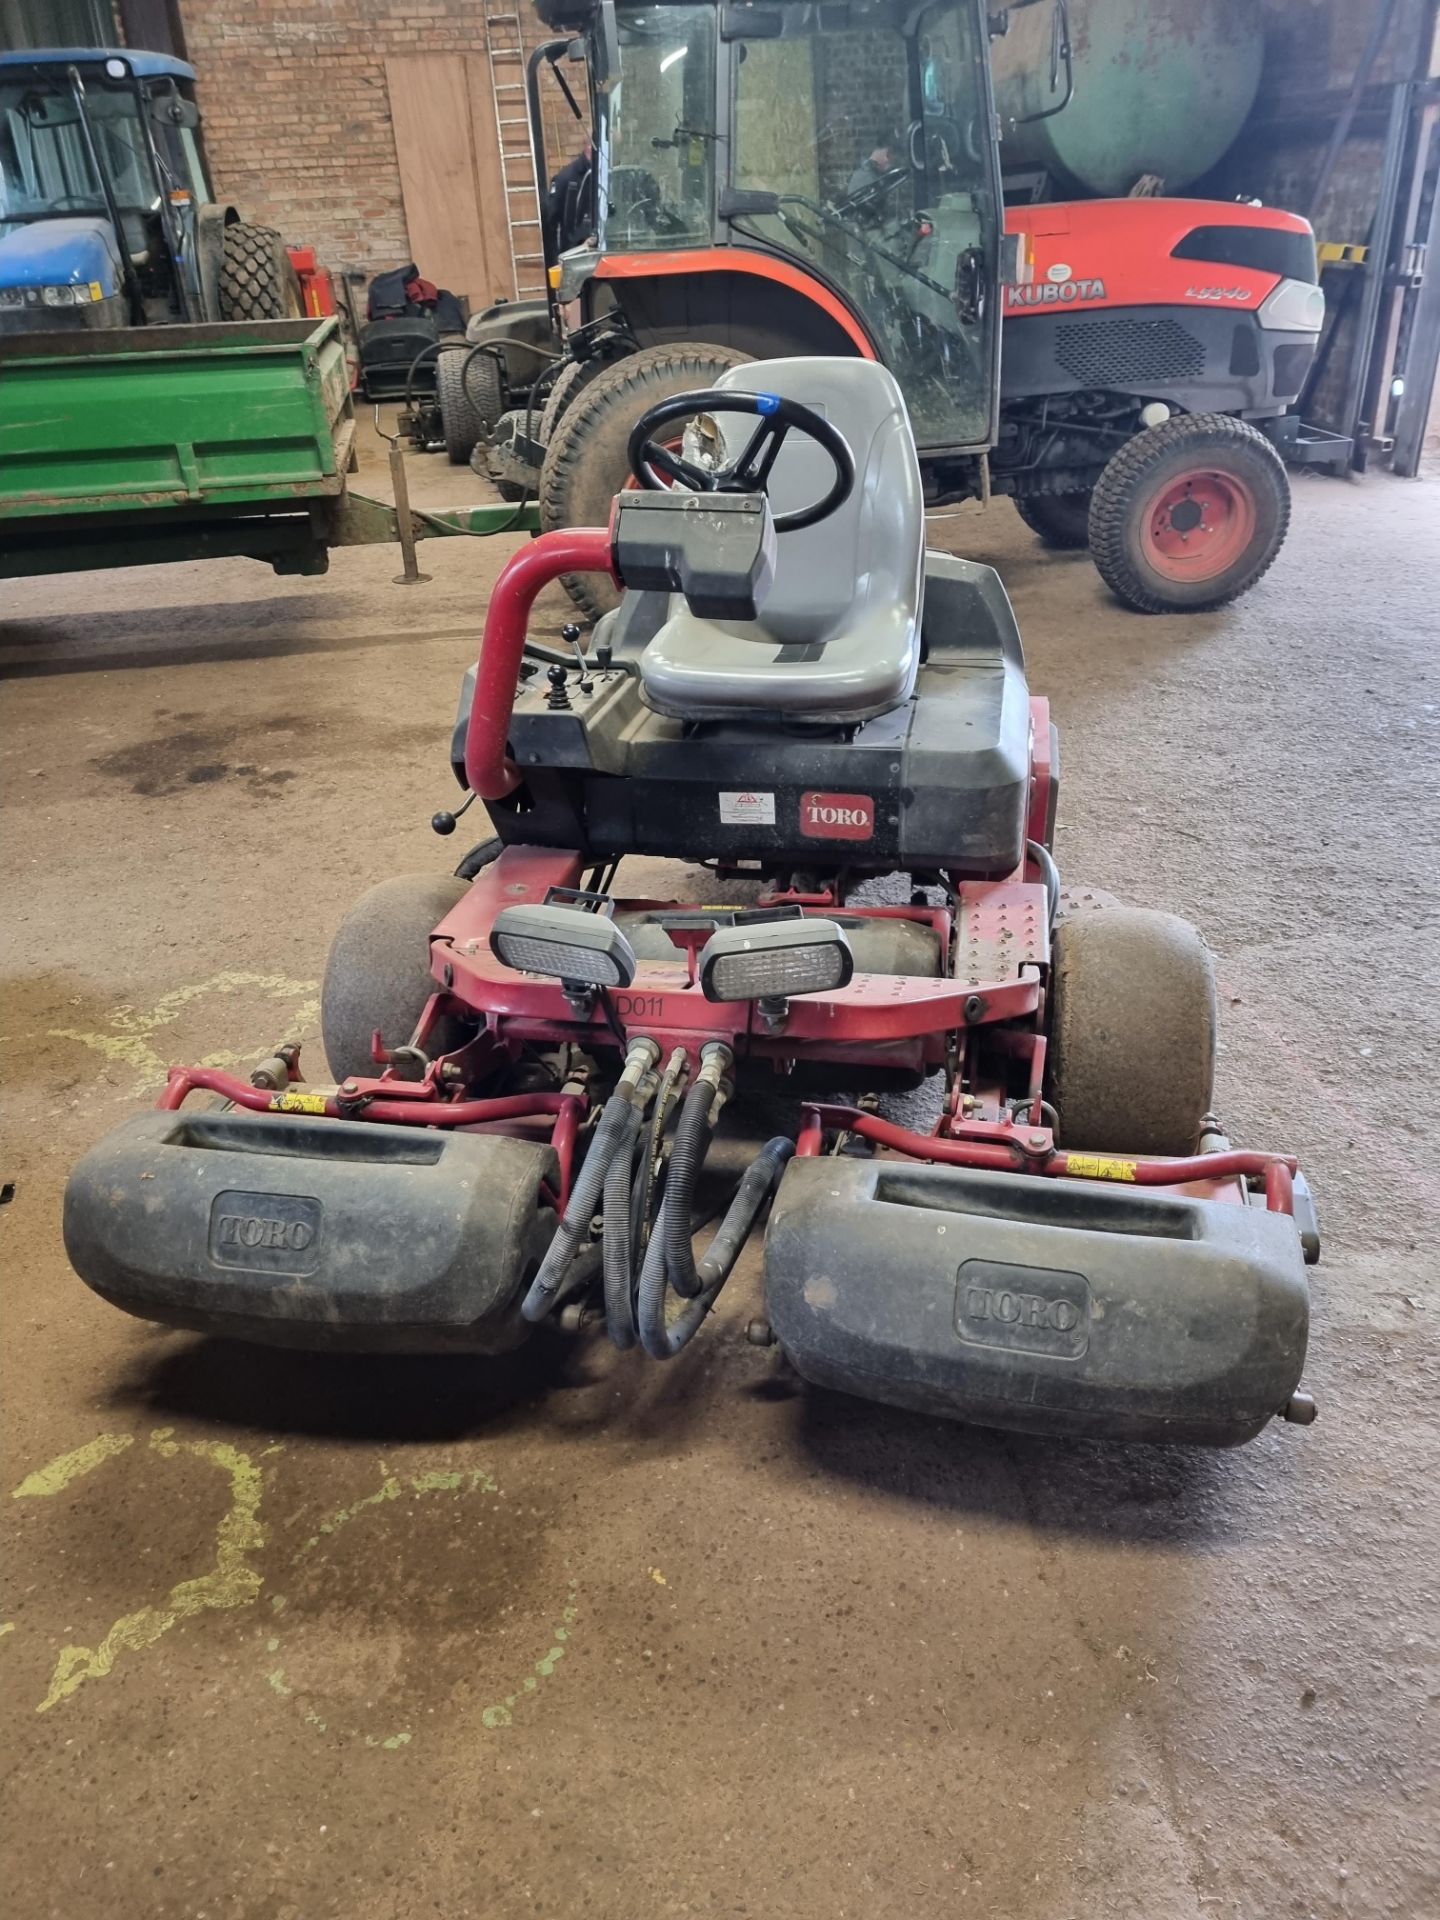 Toro Greensmaster 3250-D Mower YOM 2008 Hours 4121.6 (s/n 3632800001129) Features Briggs & - Image 4 of 10